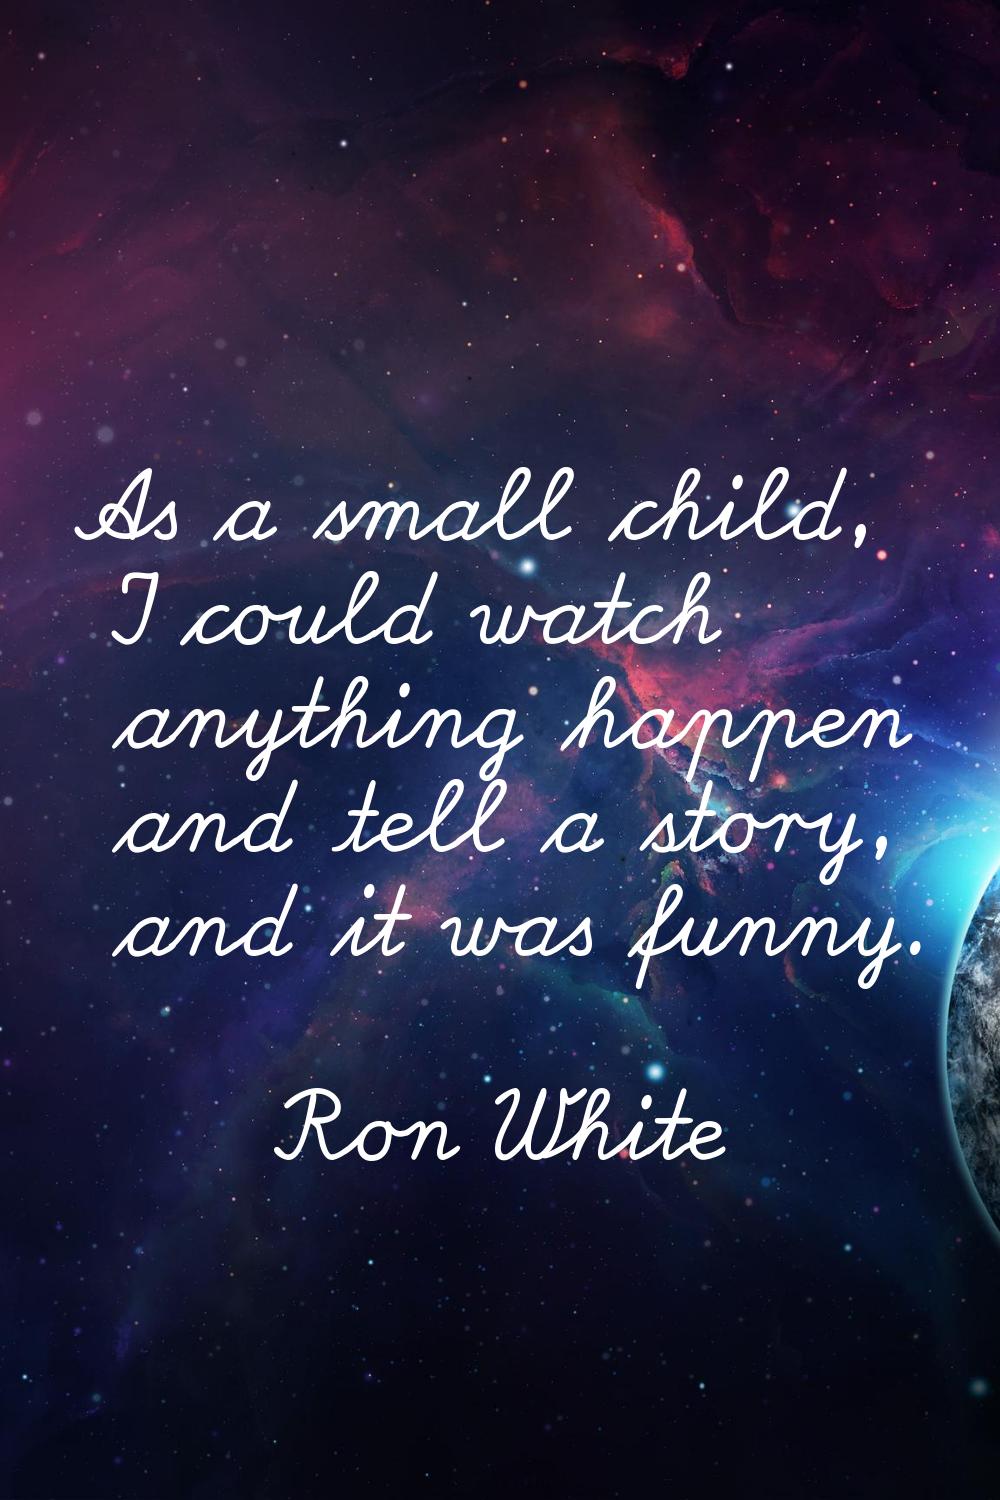 As a small child, I could watch anything happen and tell a story, and it was funny.